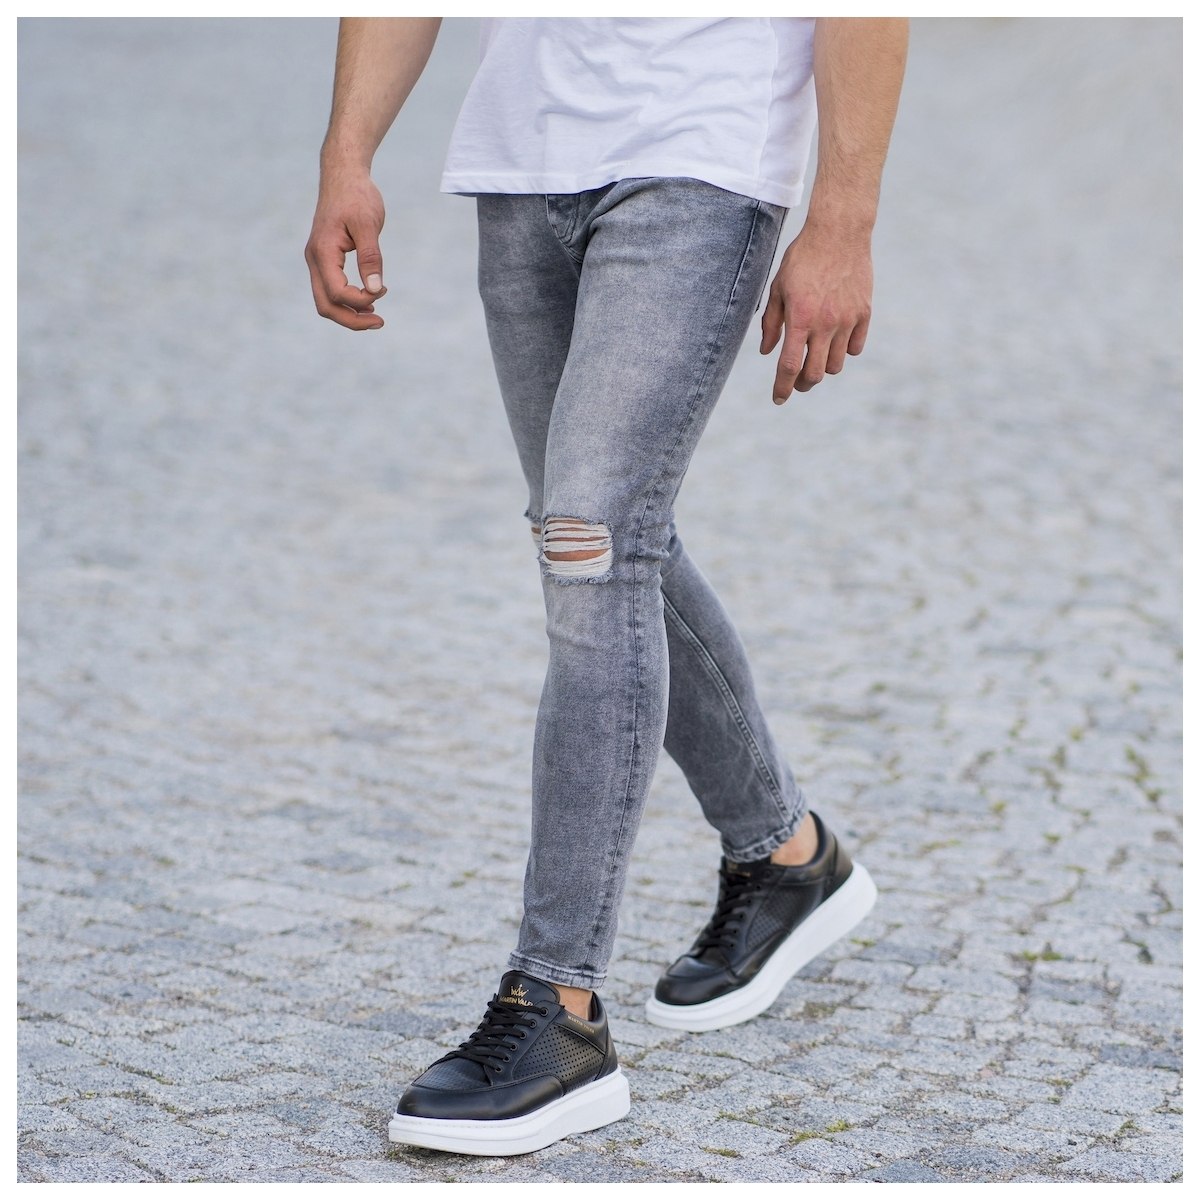 Men's Distorted Leg Skinny Jeans In Anthracite - 5